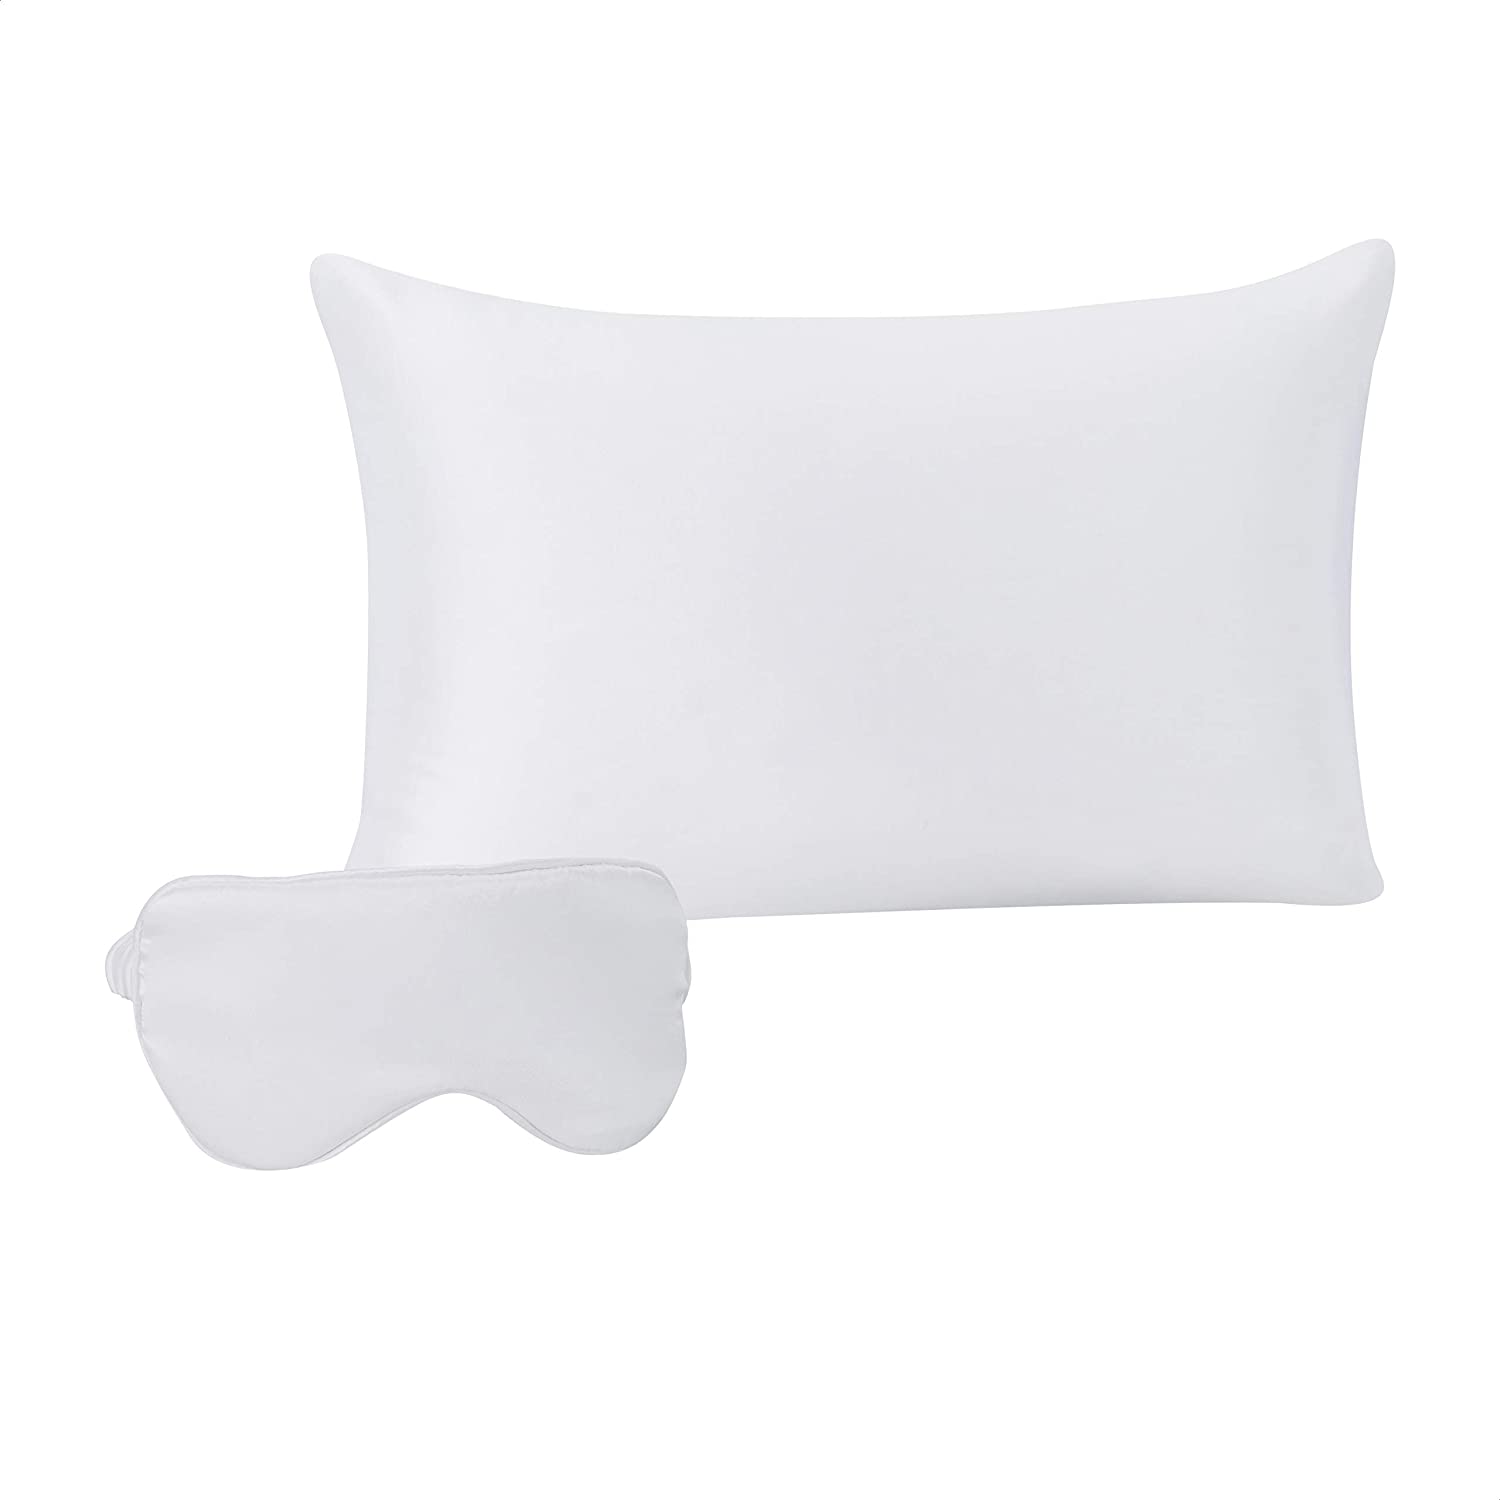 Amazon Basics 100% Mulberry Silk Sleep Set for Hair and Skin with Pillowcase, Eye-Mask and Travel Pouch - Dual Side 19 Momme Silk, White, Standard, Sleep Set